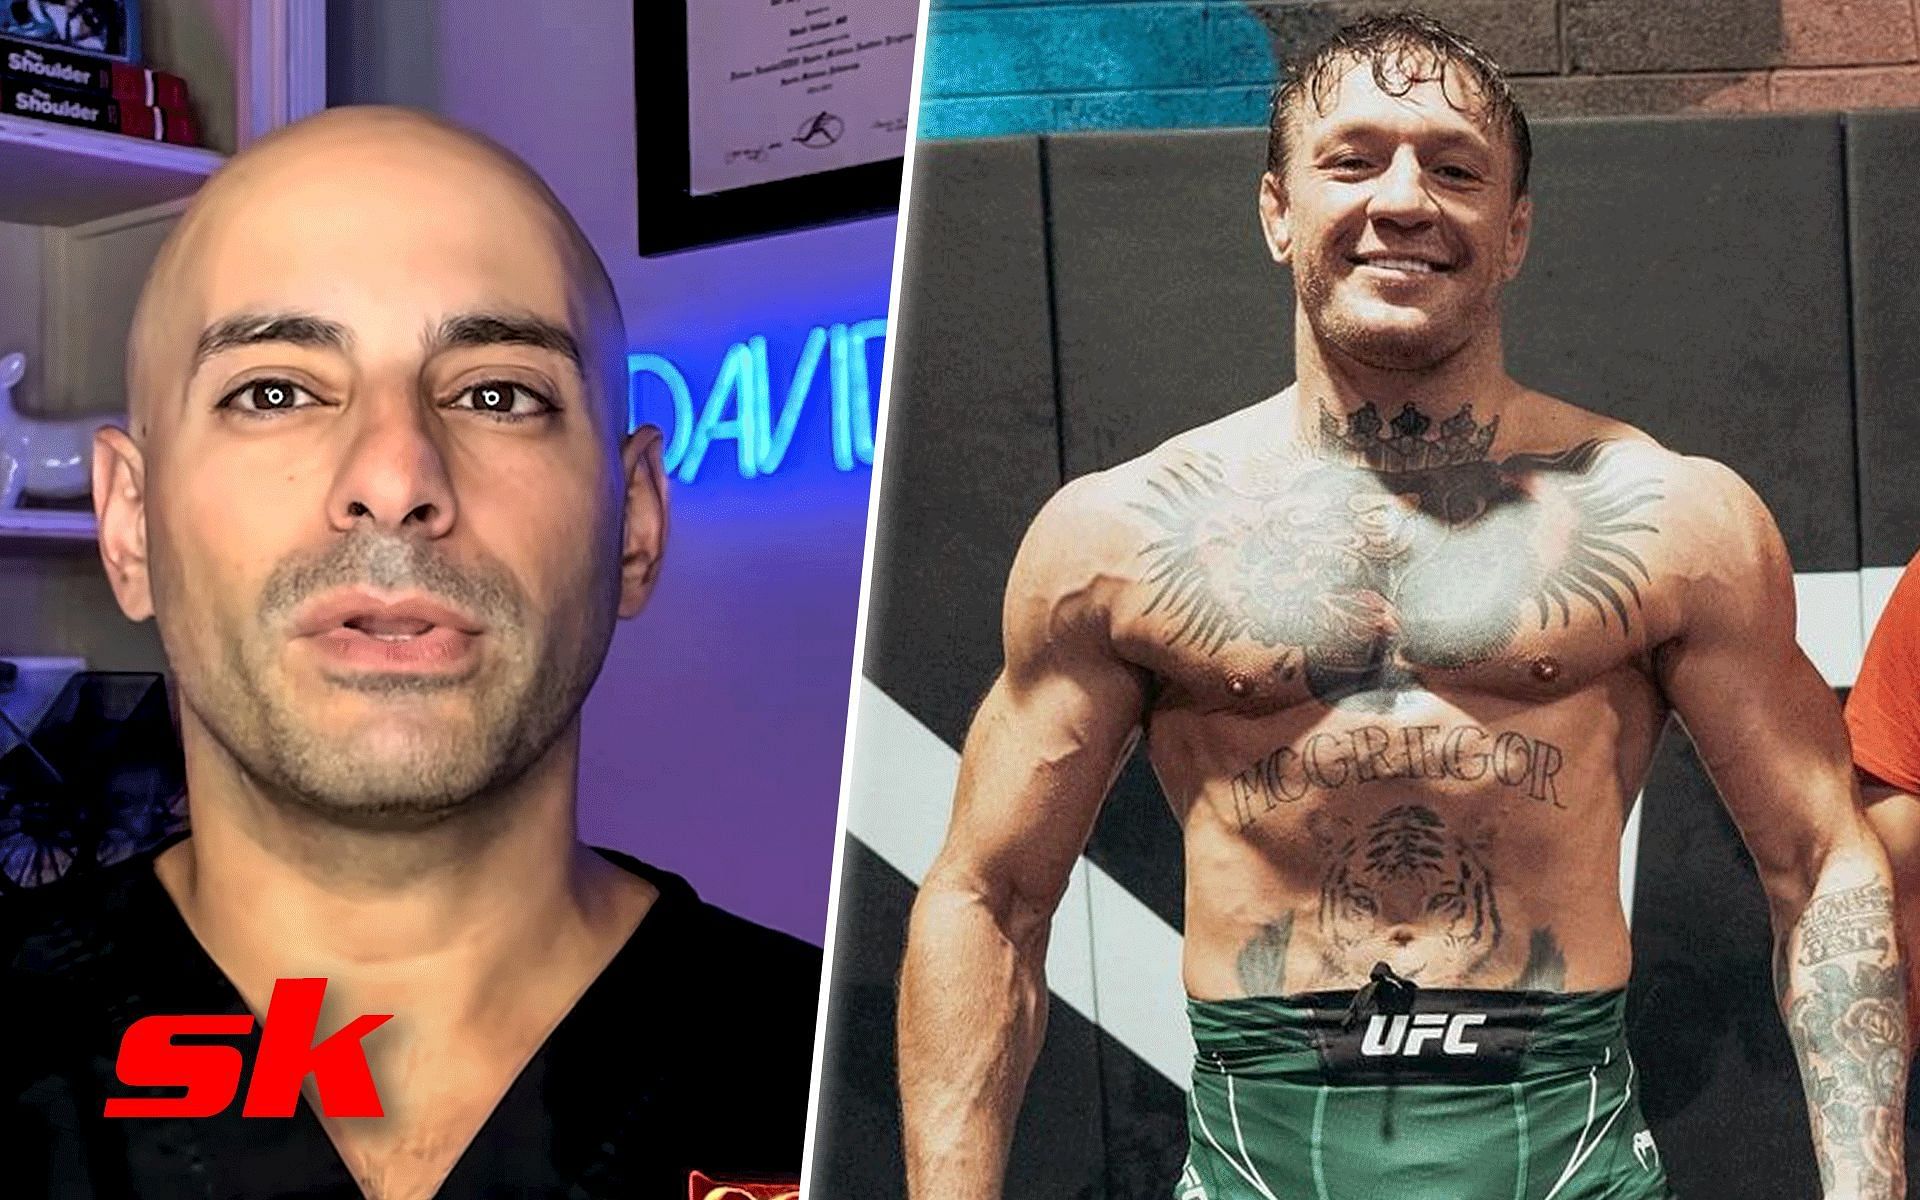 Dr. David Abbasi (left) and Conor McGregor (right). [Images courtesy: left image from YouTube Dr. David Abbasi and right image from @thenotoriousmma]